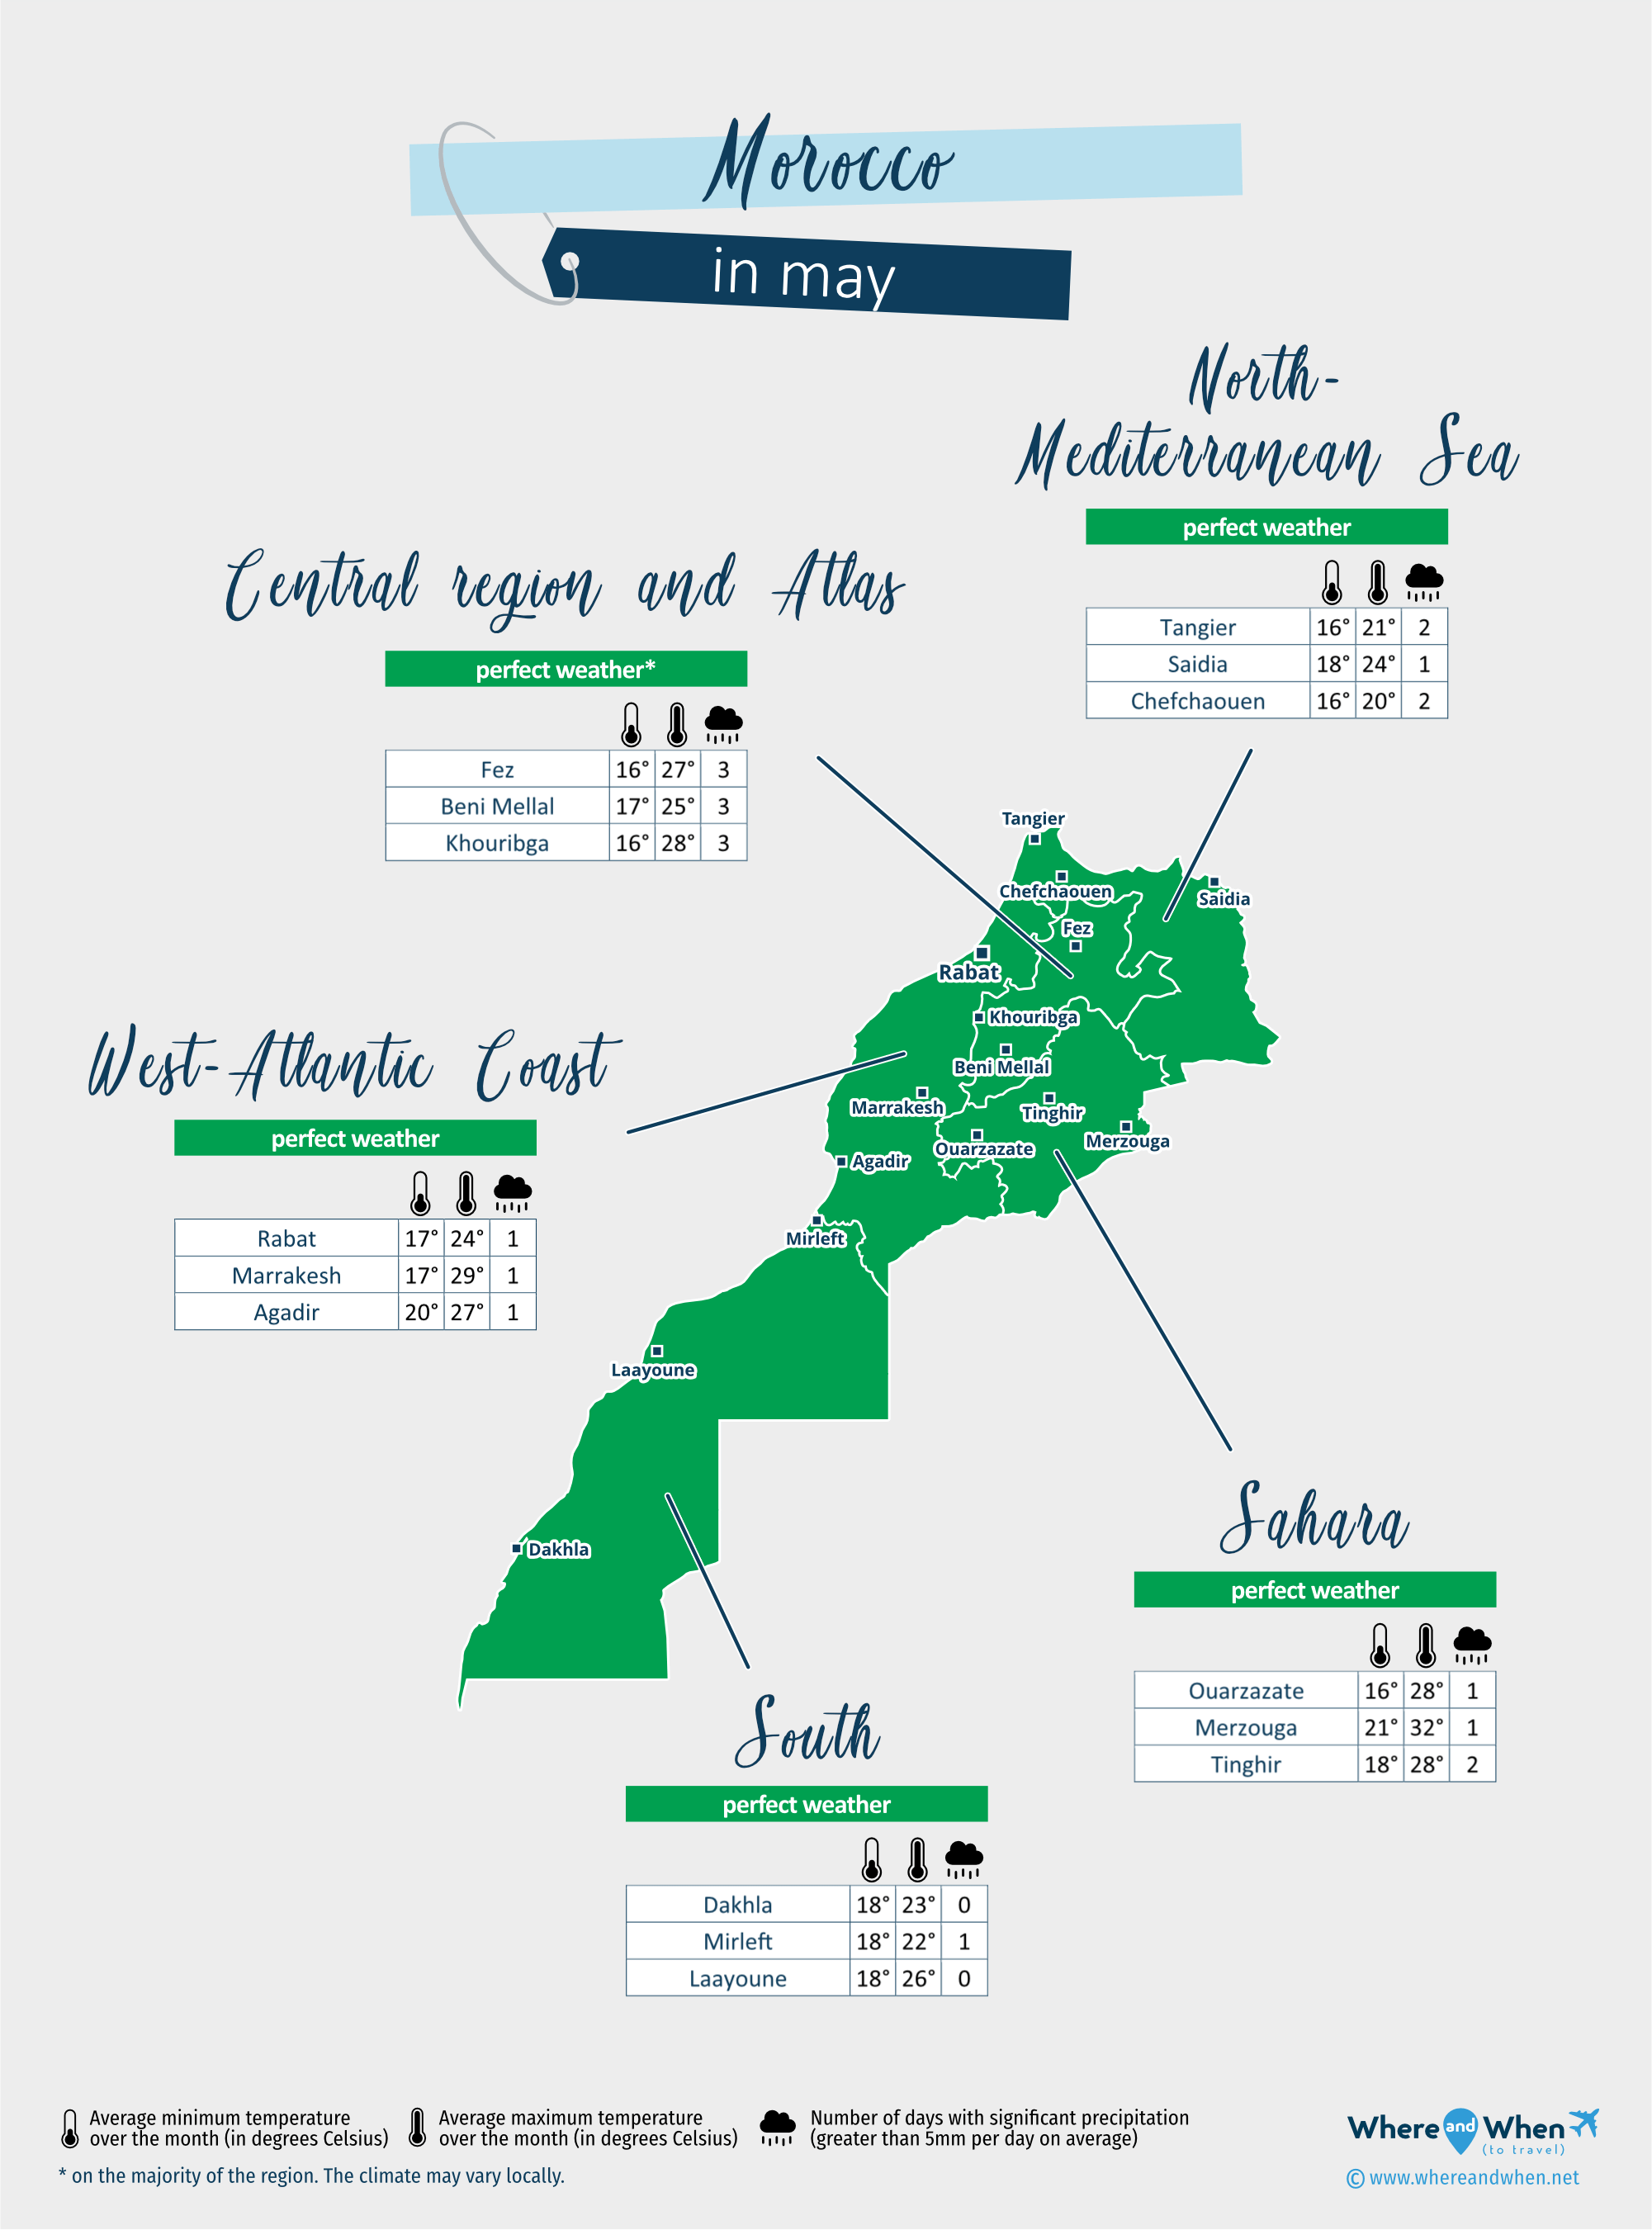 Morocco: weather map in may in different regions